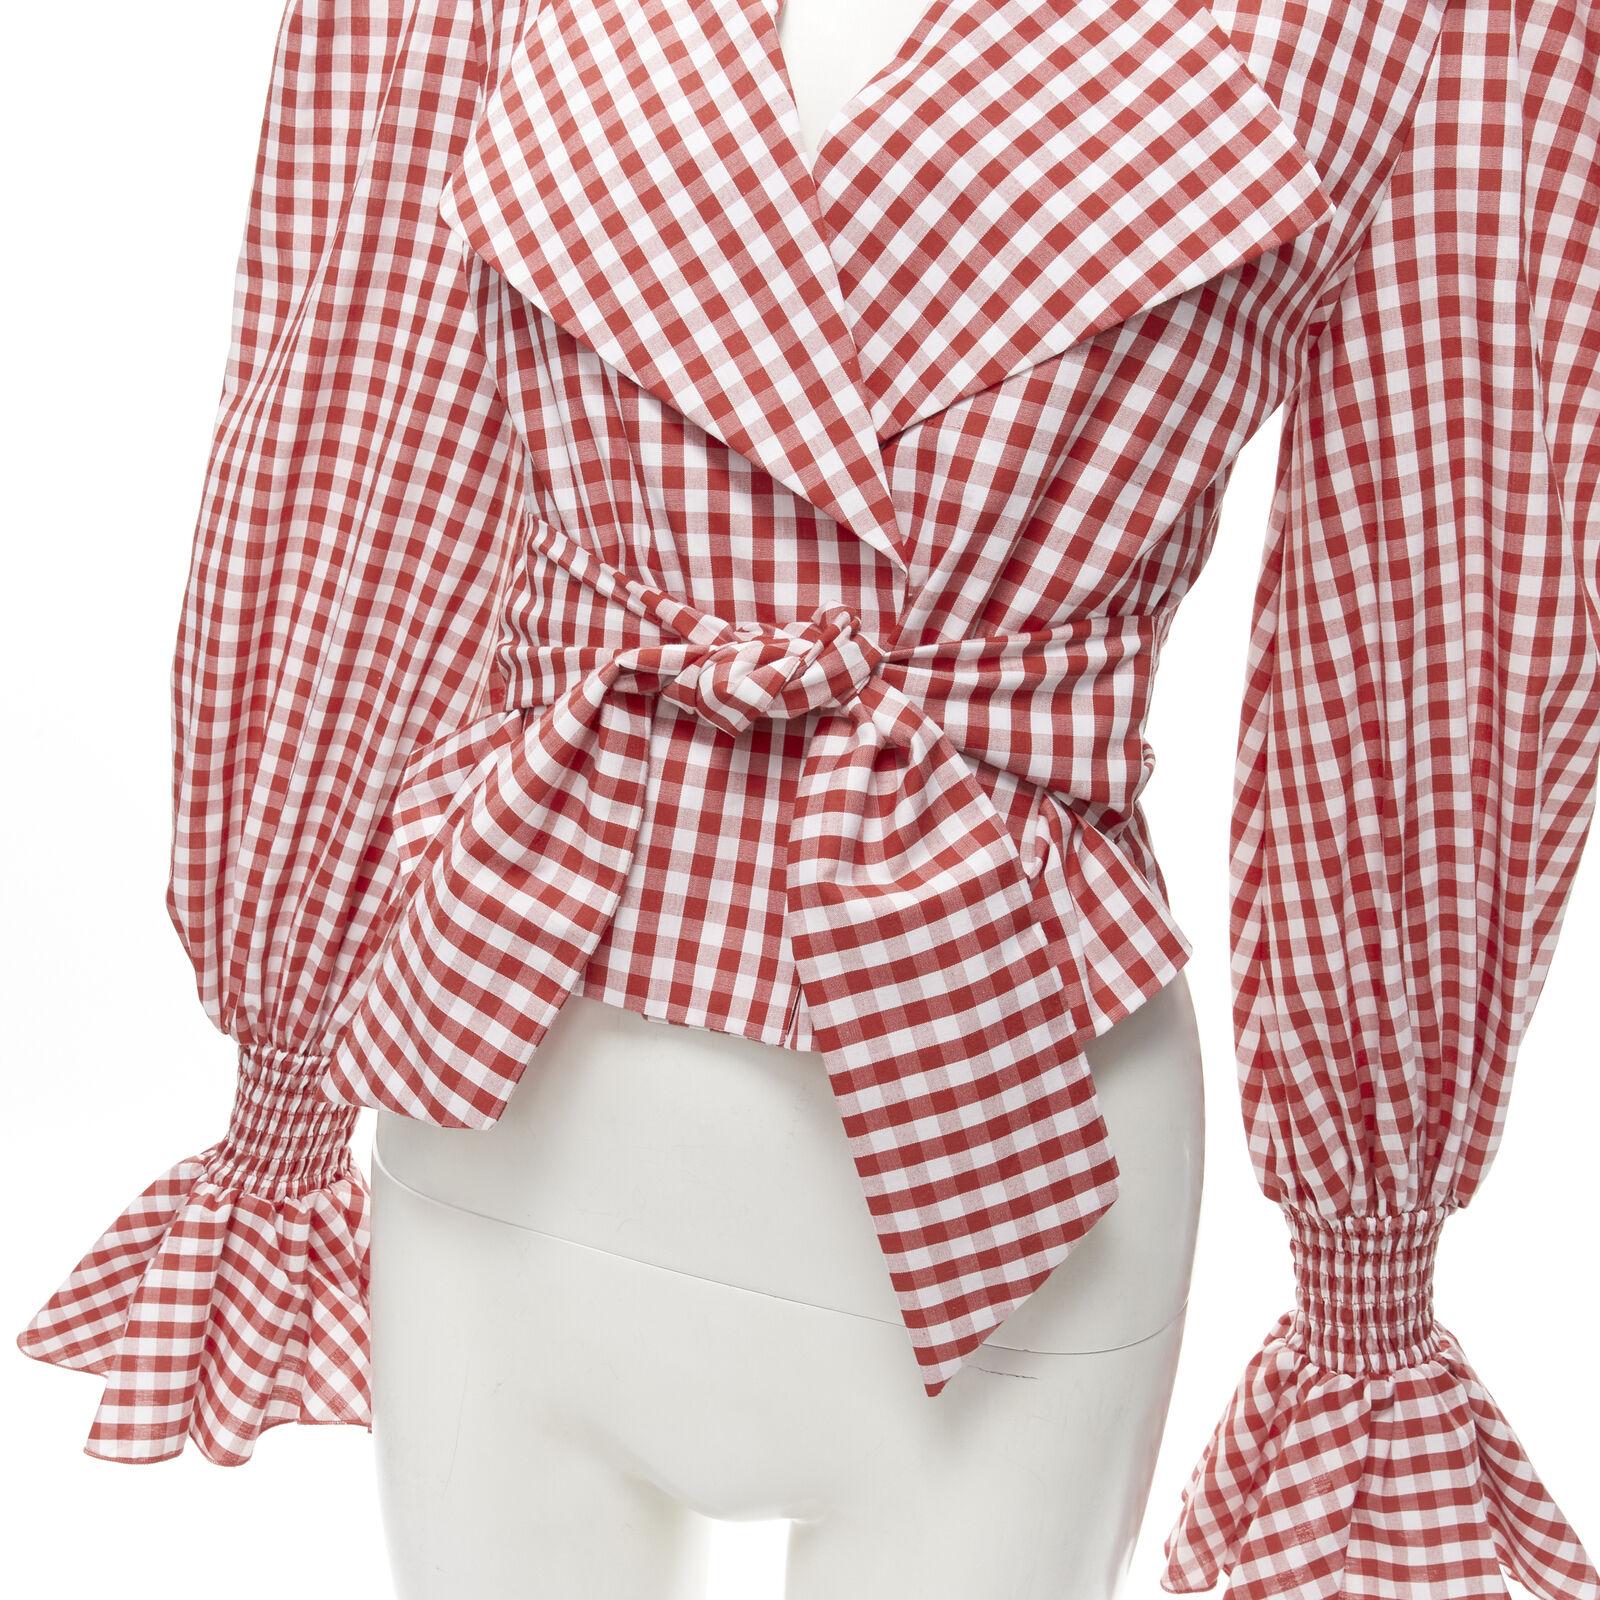 BALMAIN red white gingham cotton tie belt bishop sleeves cottage top FR34 XS
Reference: AAWC/A00277
Brand: Balmain
Designer: Olivier Rousteing
Material: Cotton
Color: Red, White
Pattern: Plaid
Closure: Self Tie
Made in: